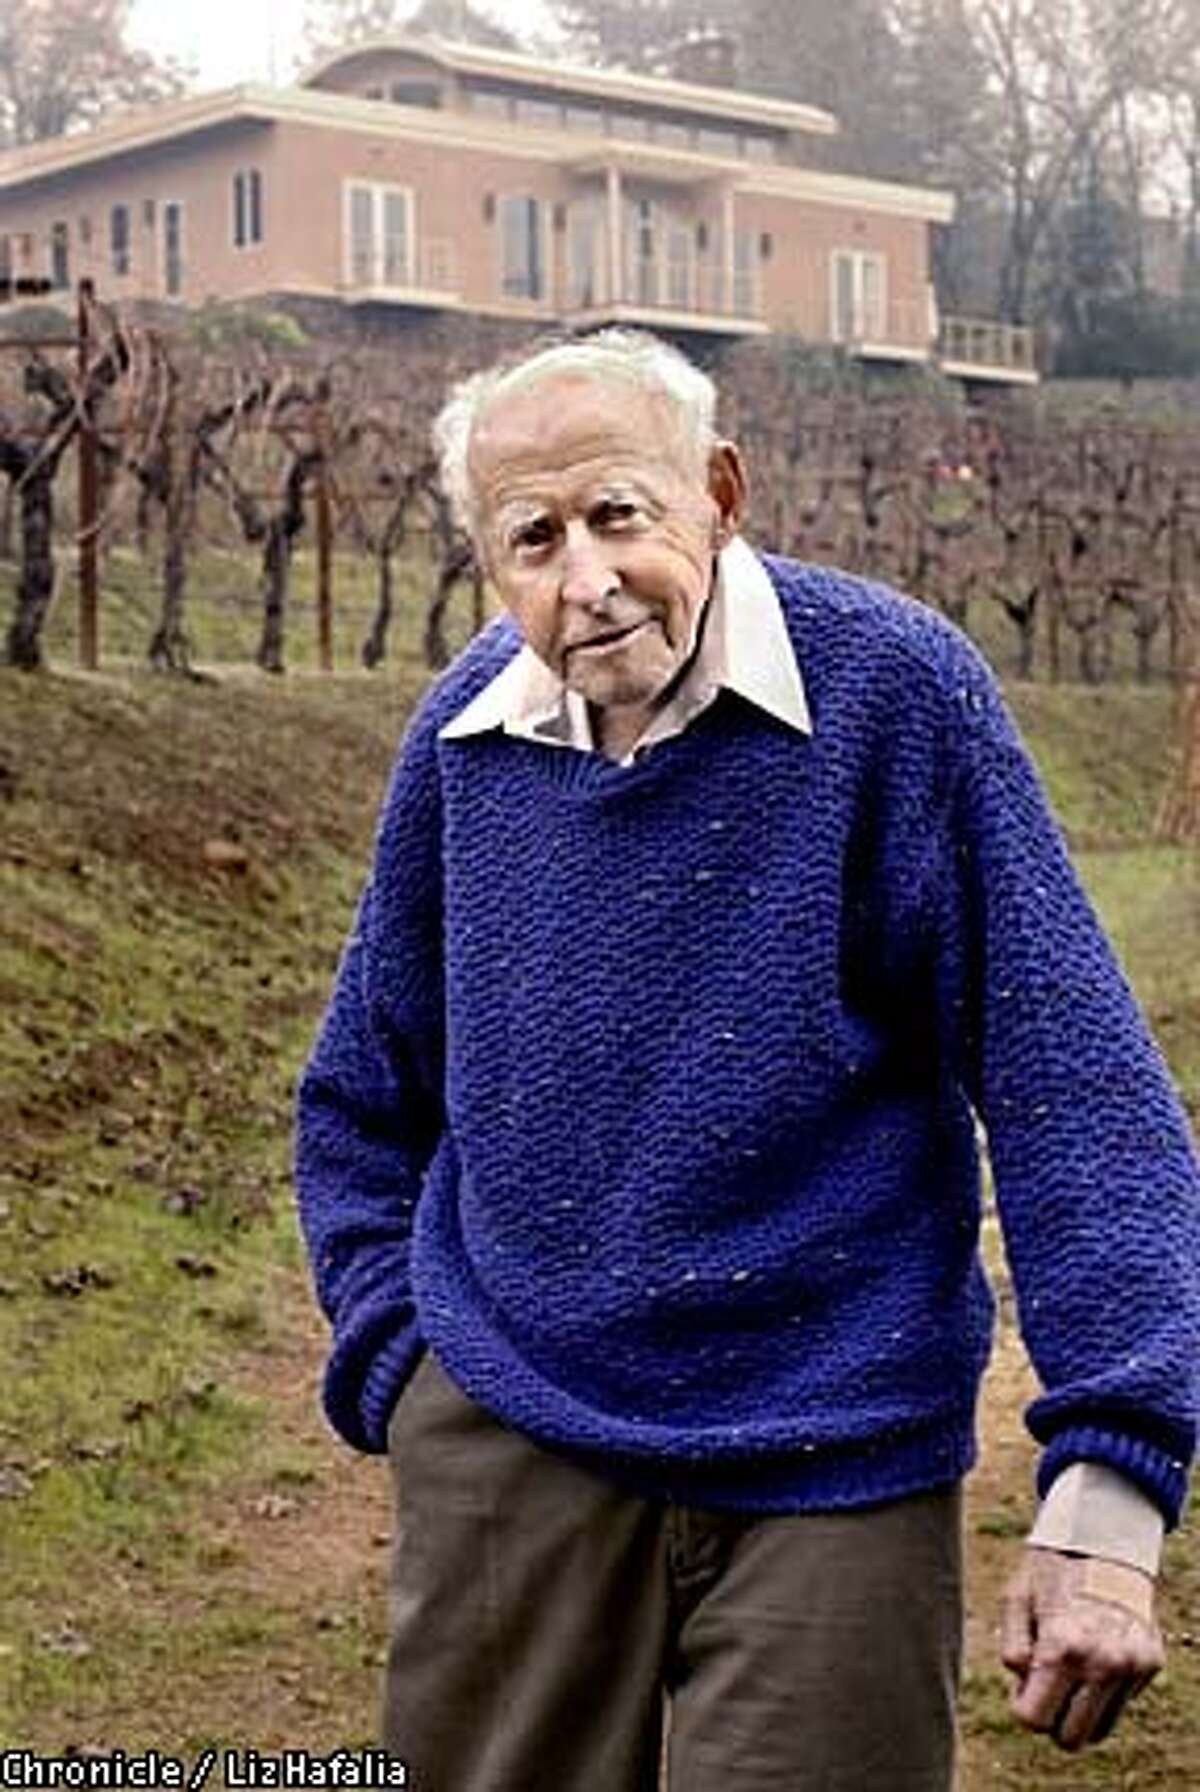 Pioneer: Al Brounstein is considered the father of Diamond Mountain Cabernet. Chronicle photo by Liz Hafalia